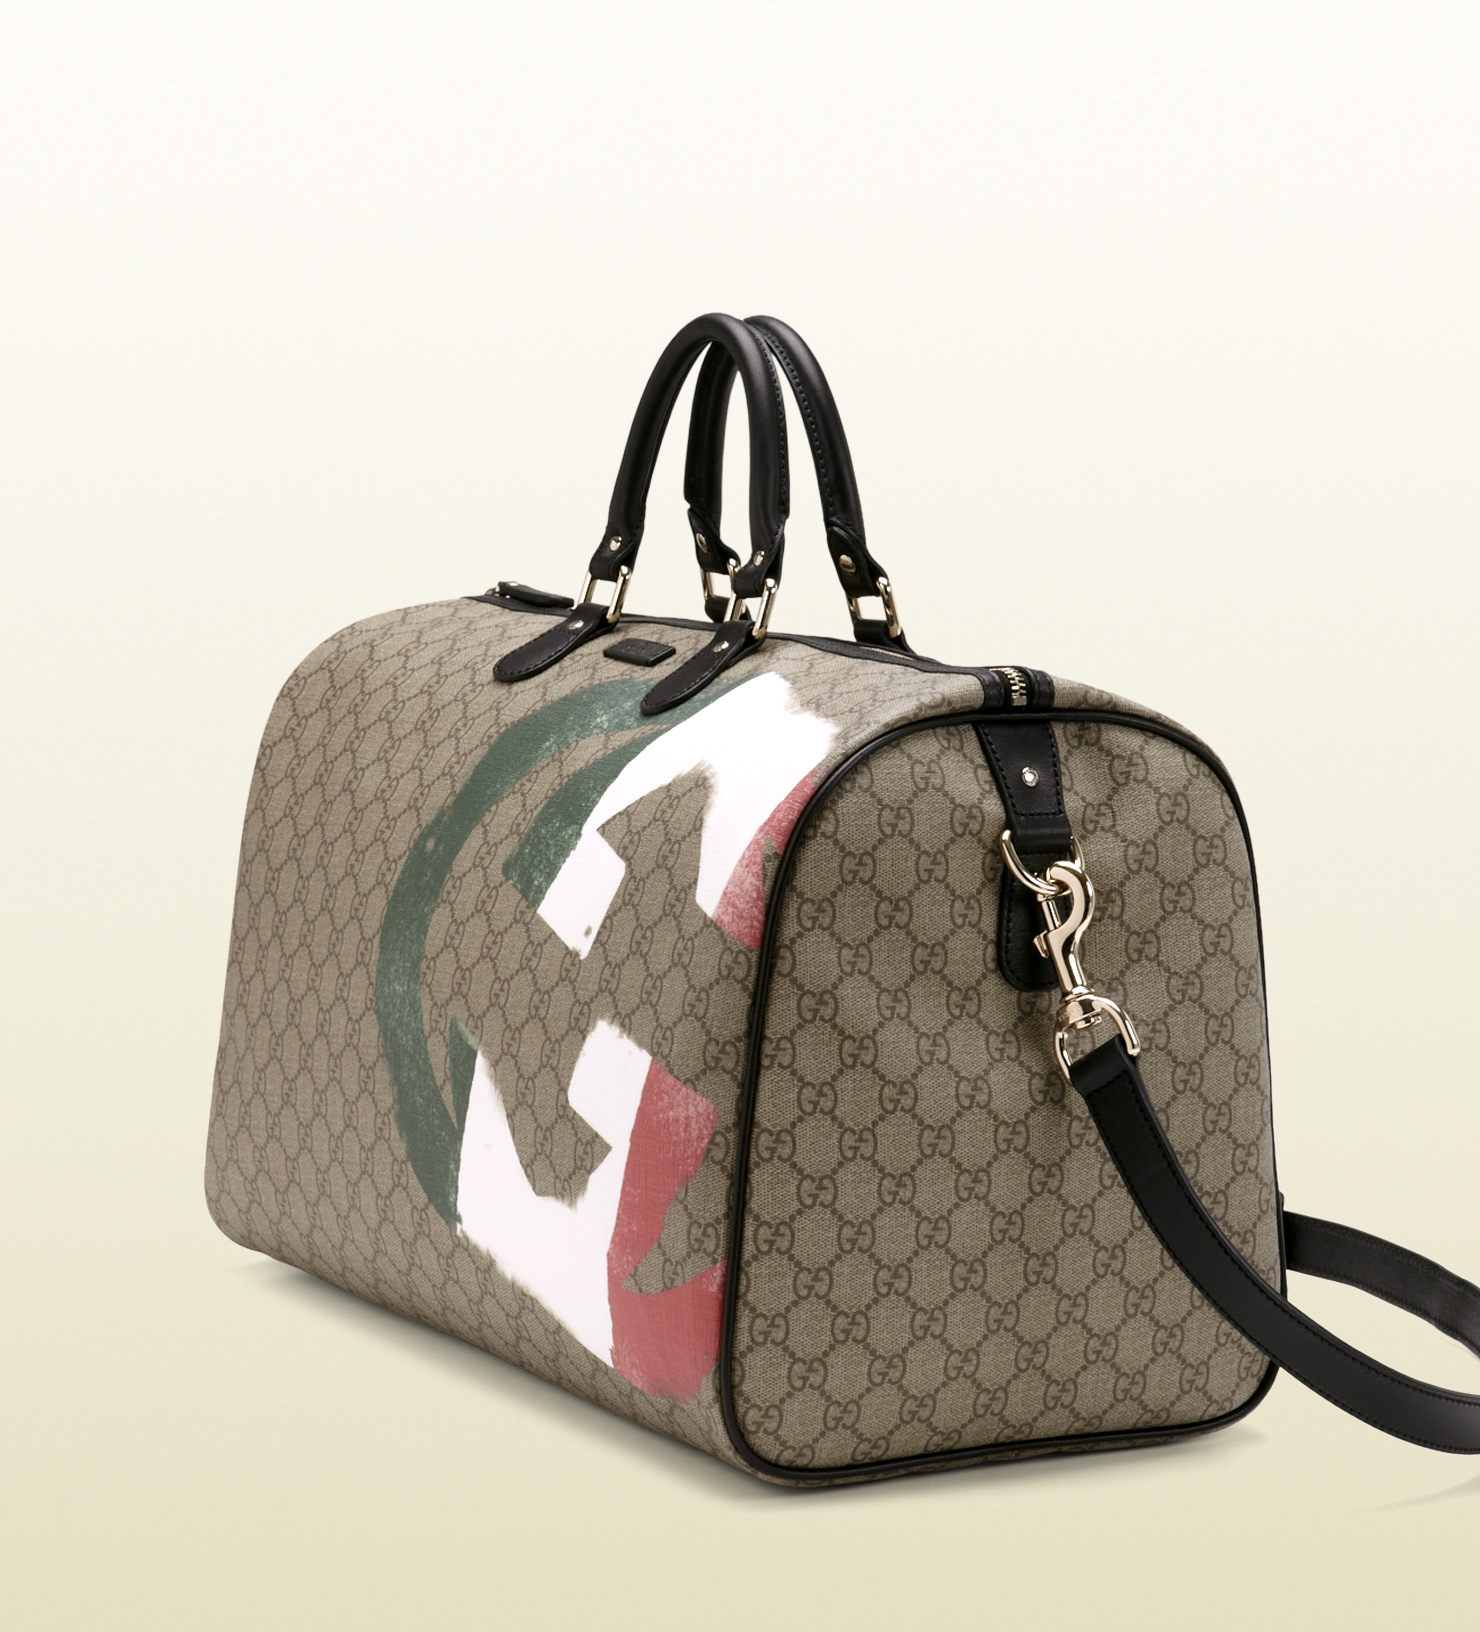 Gucci Italy Gg Flag Collection Duffle Bag in Gray for Men - Lyst